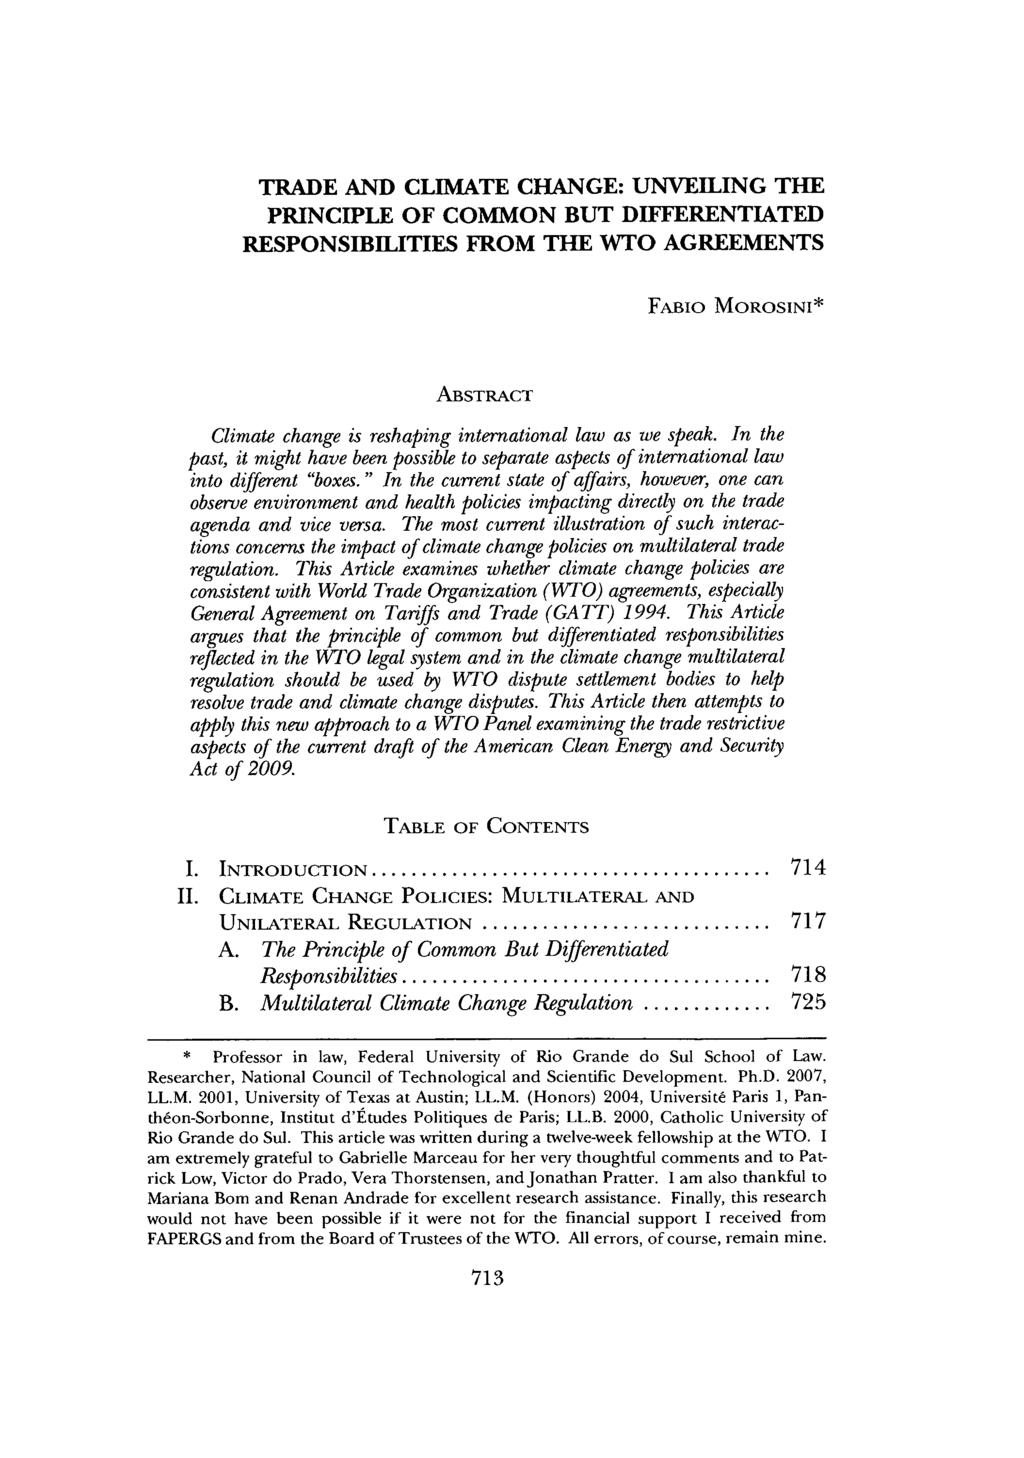 TRADE AND CLIMATE CHANGE: UNVEILING THE PRINCIPLE OF COMMON BUT DIFFERENTIATED RESPONSIBILITIES FROM THE WTO AGREEMENTS FABio MOROSINI* ABSTRACT Climate change is reshaping international law as we